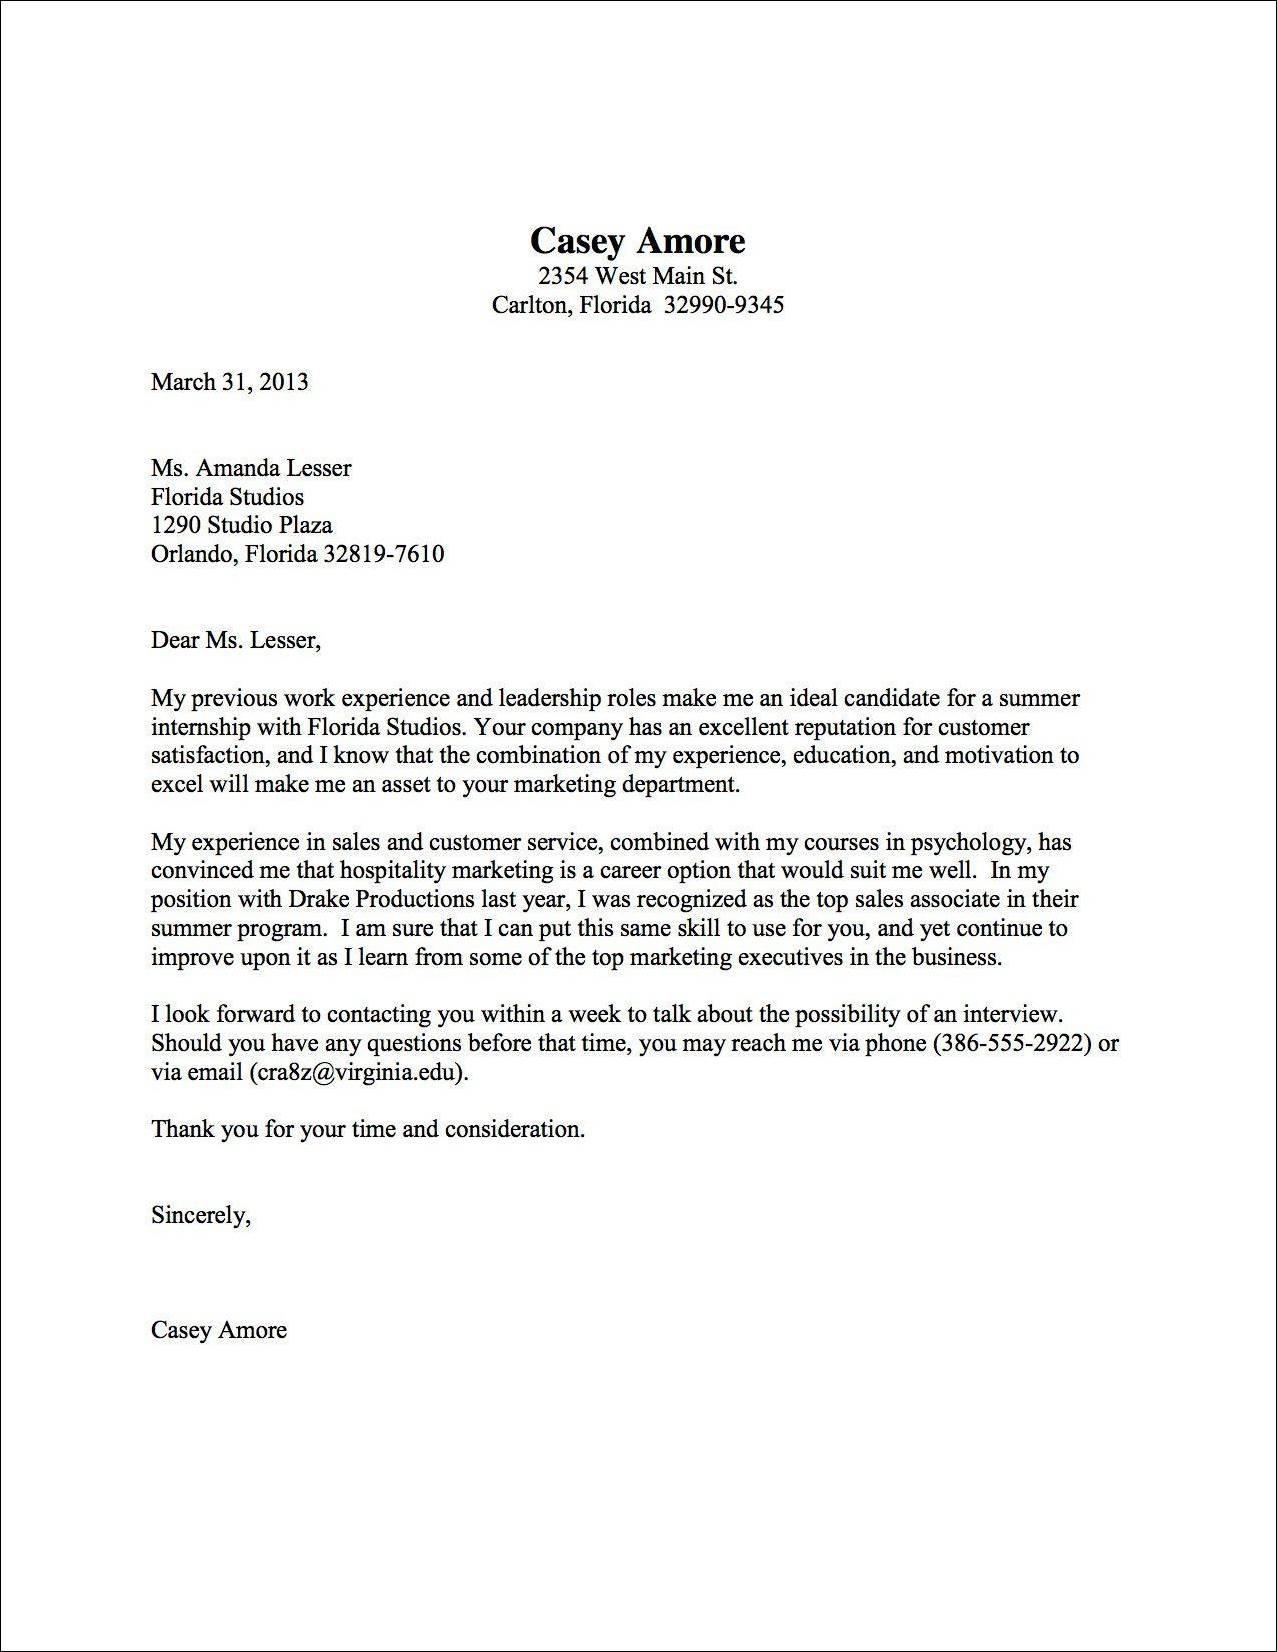 cover letter resume example